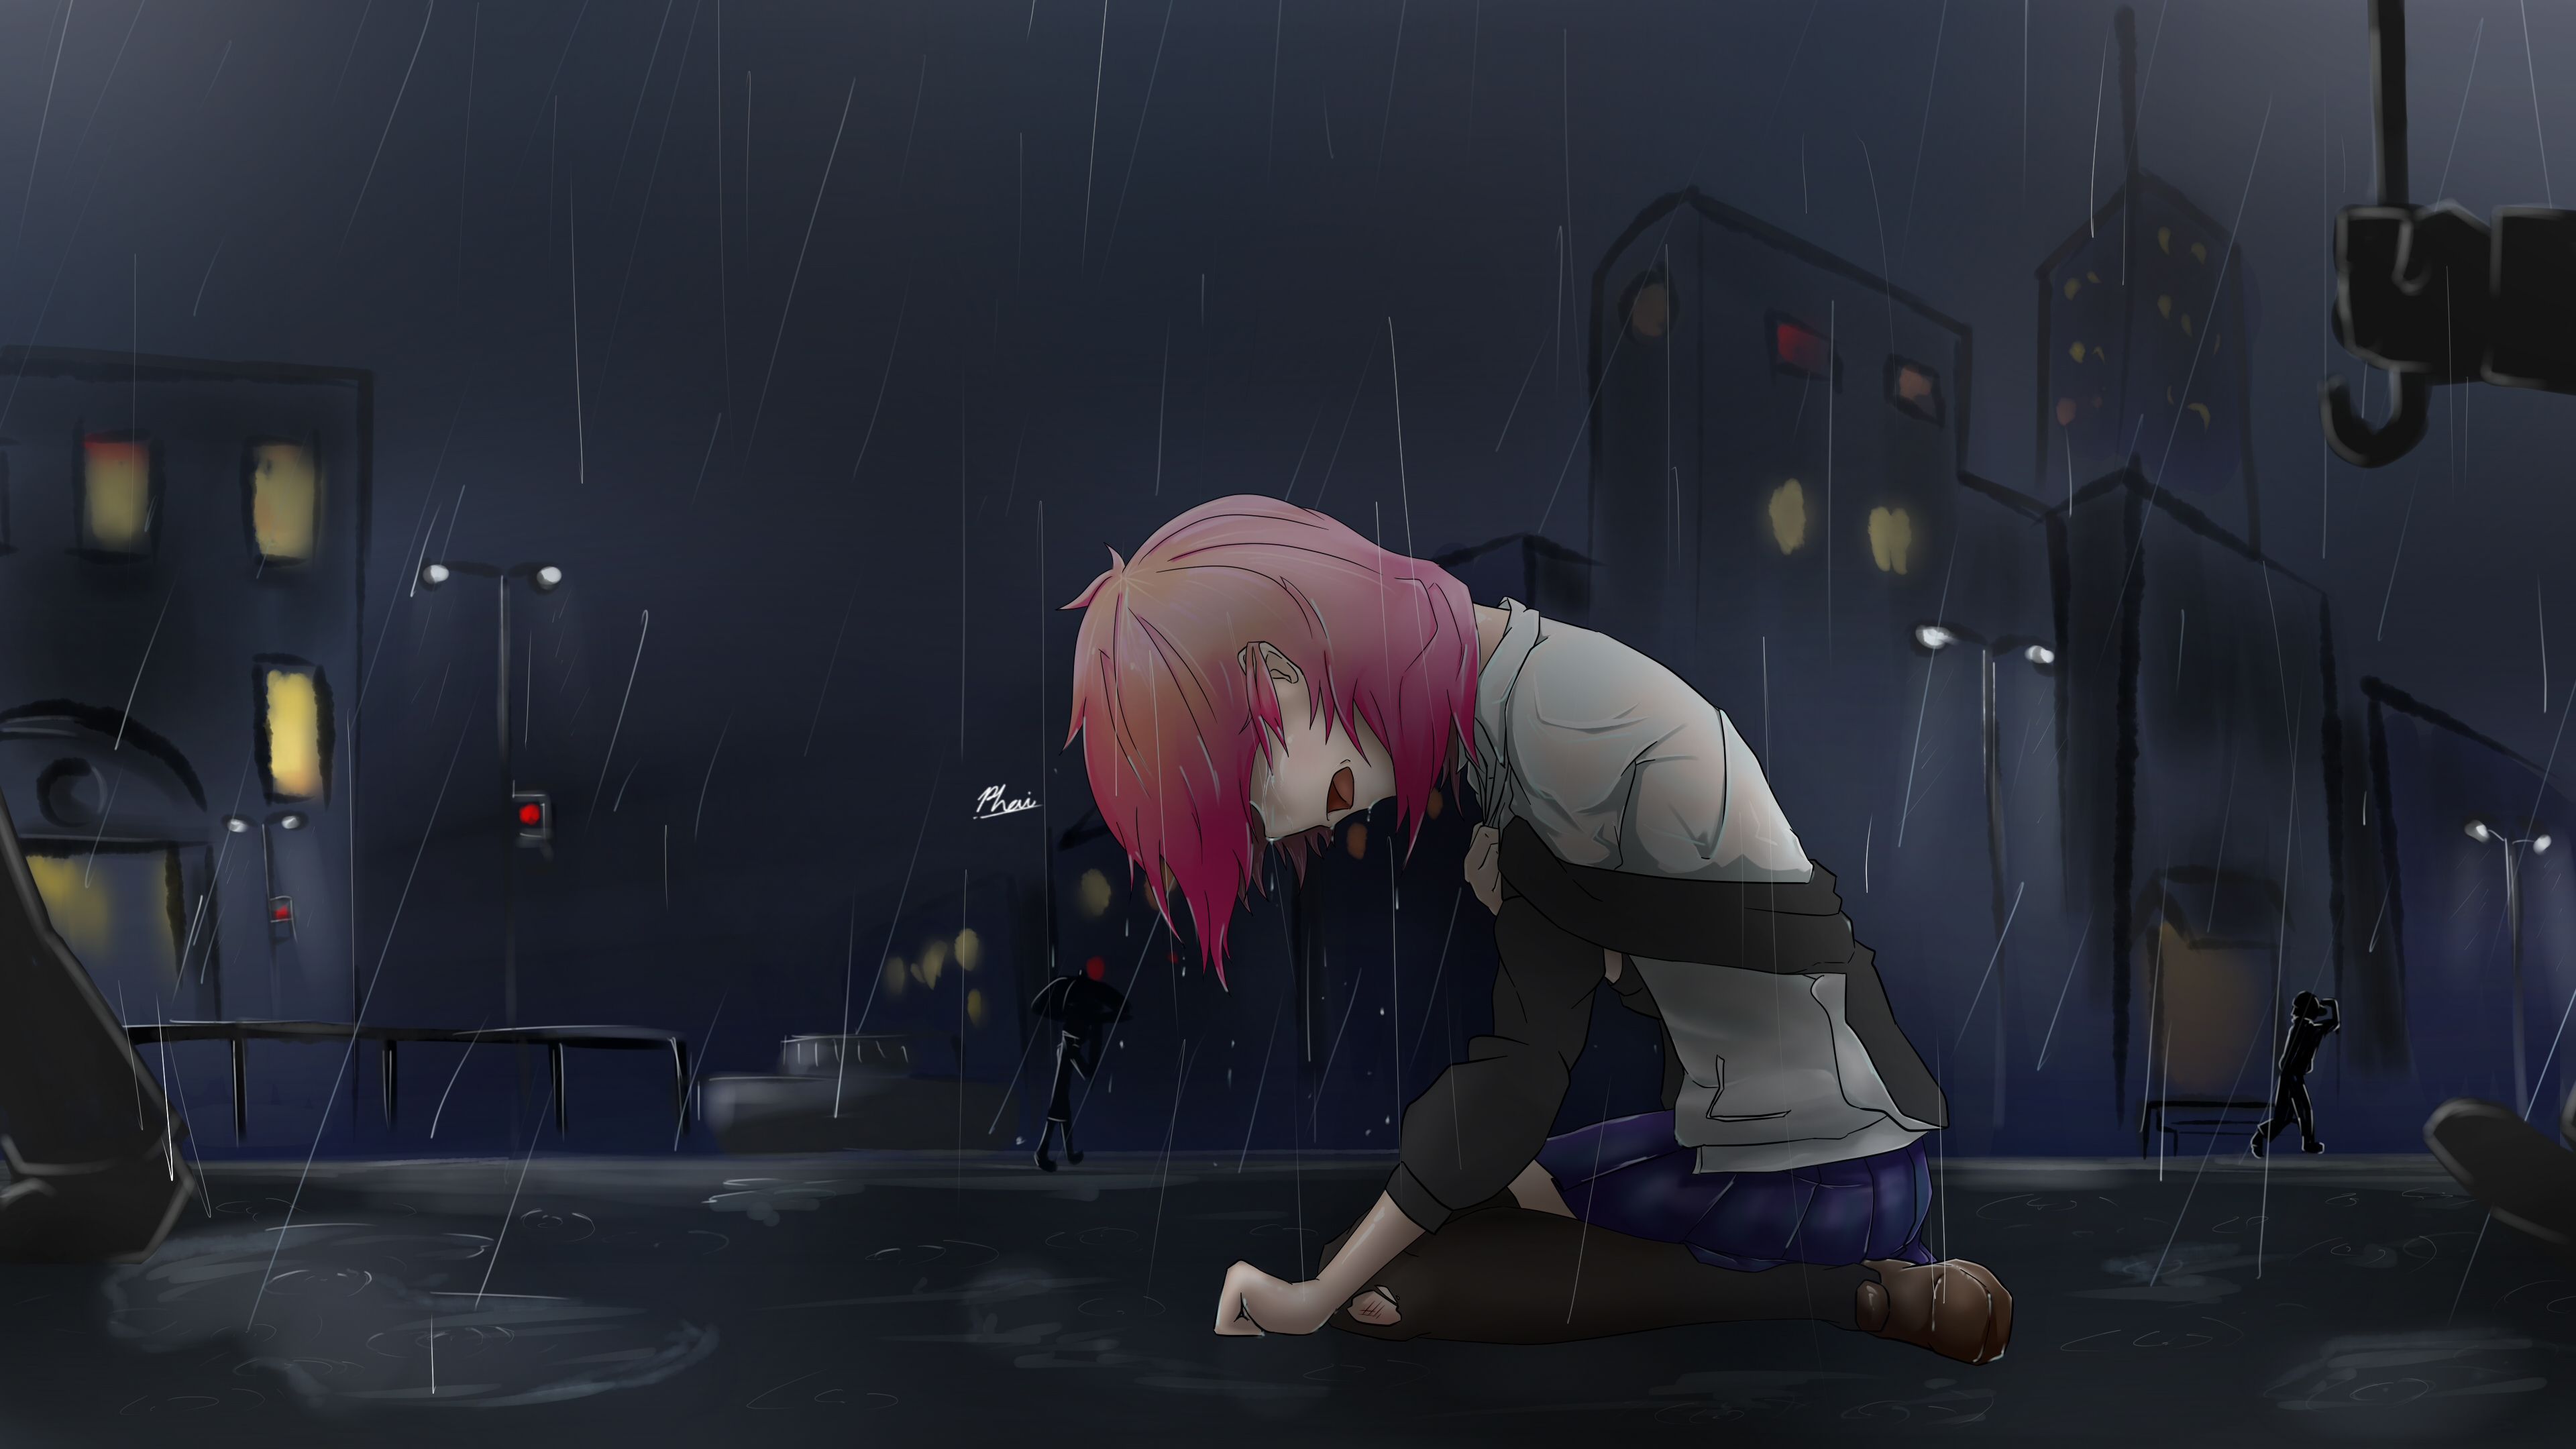 Crying girl 4k Ultra HD Wallpaper. Background Imagex2160